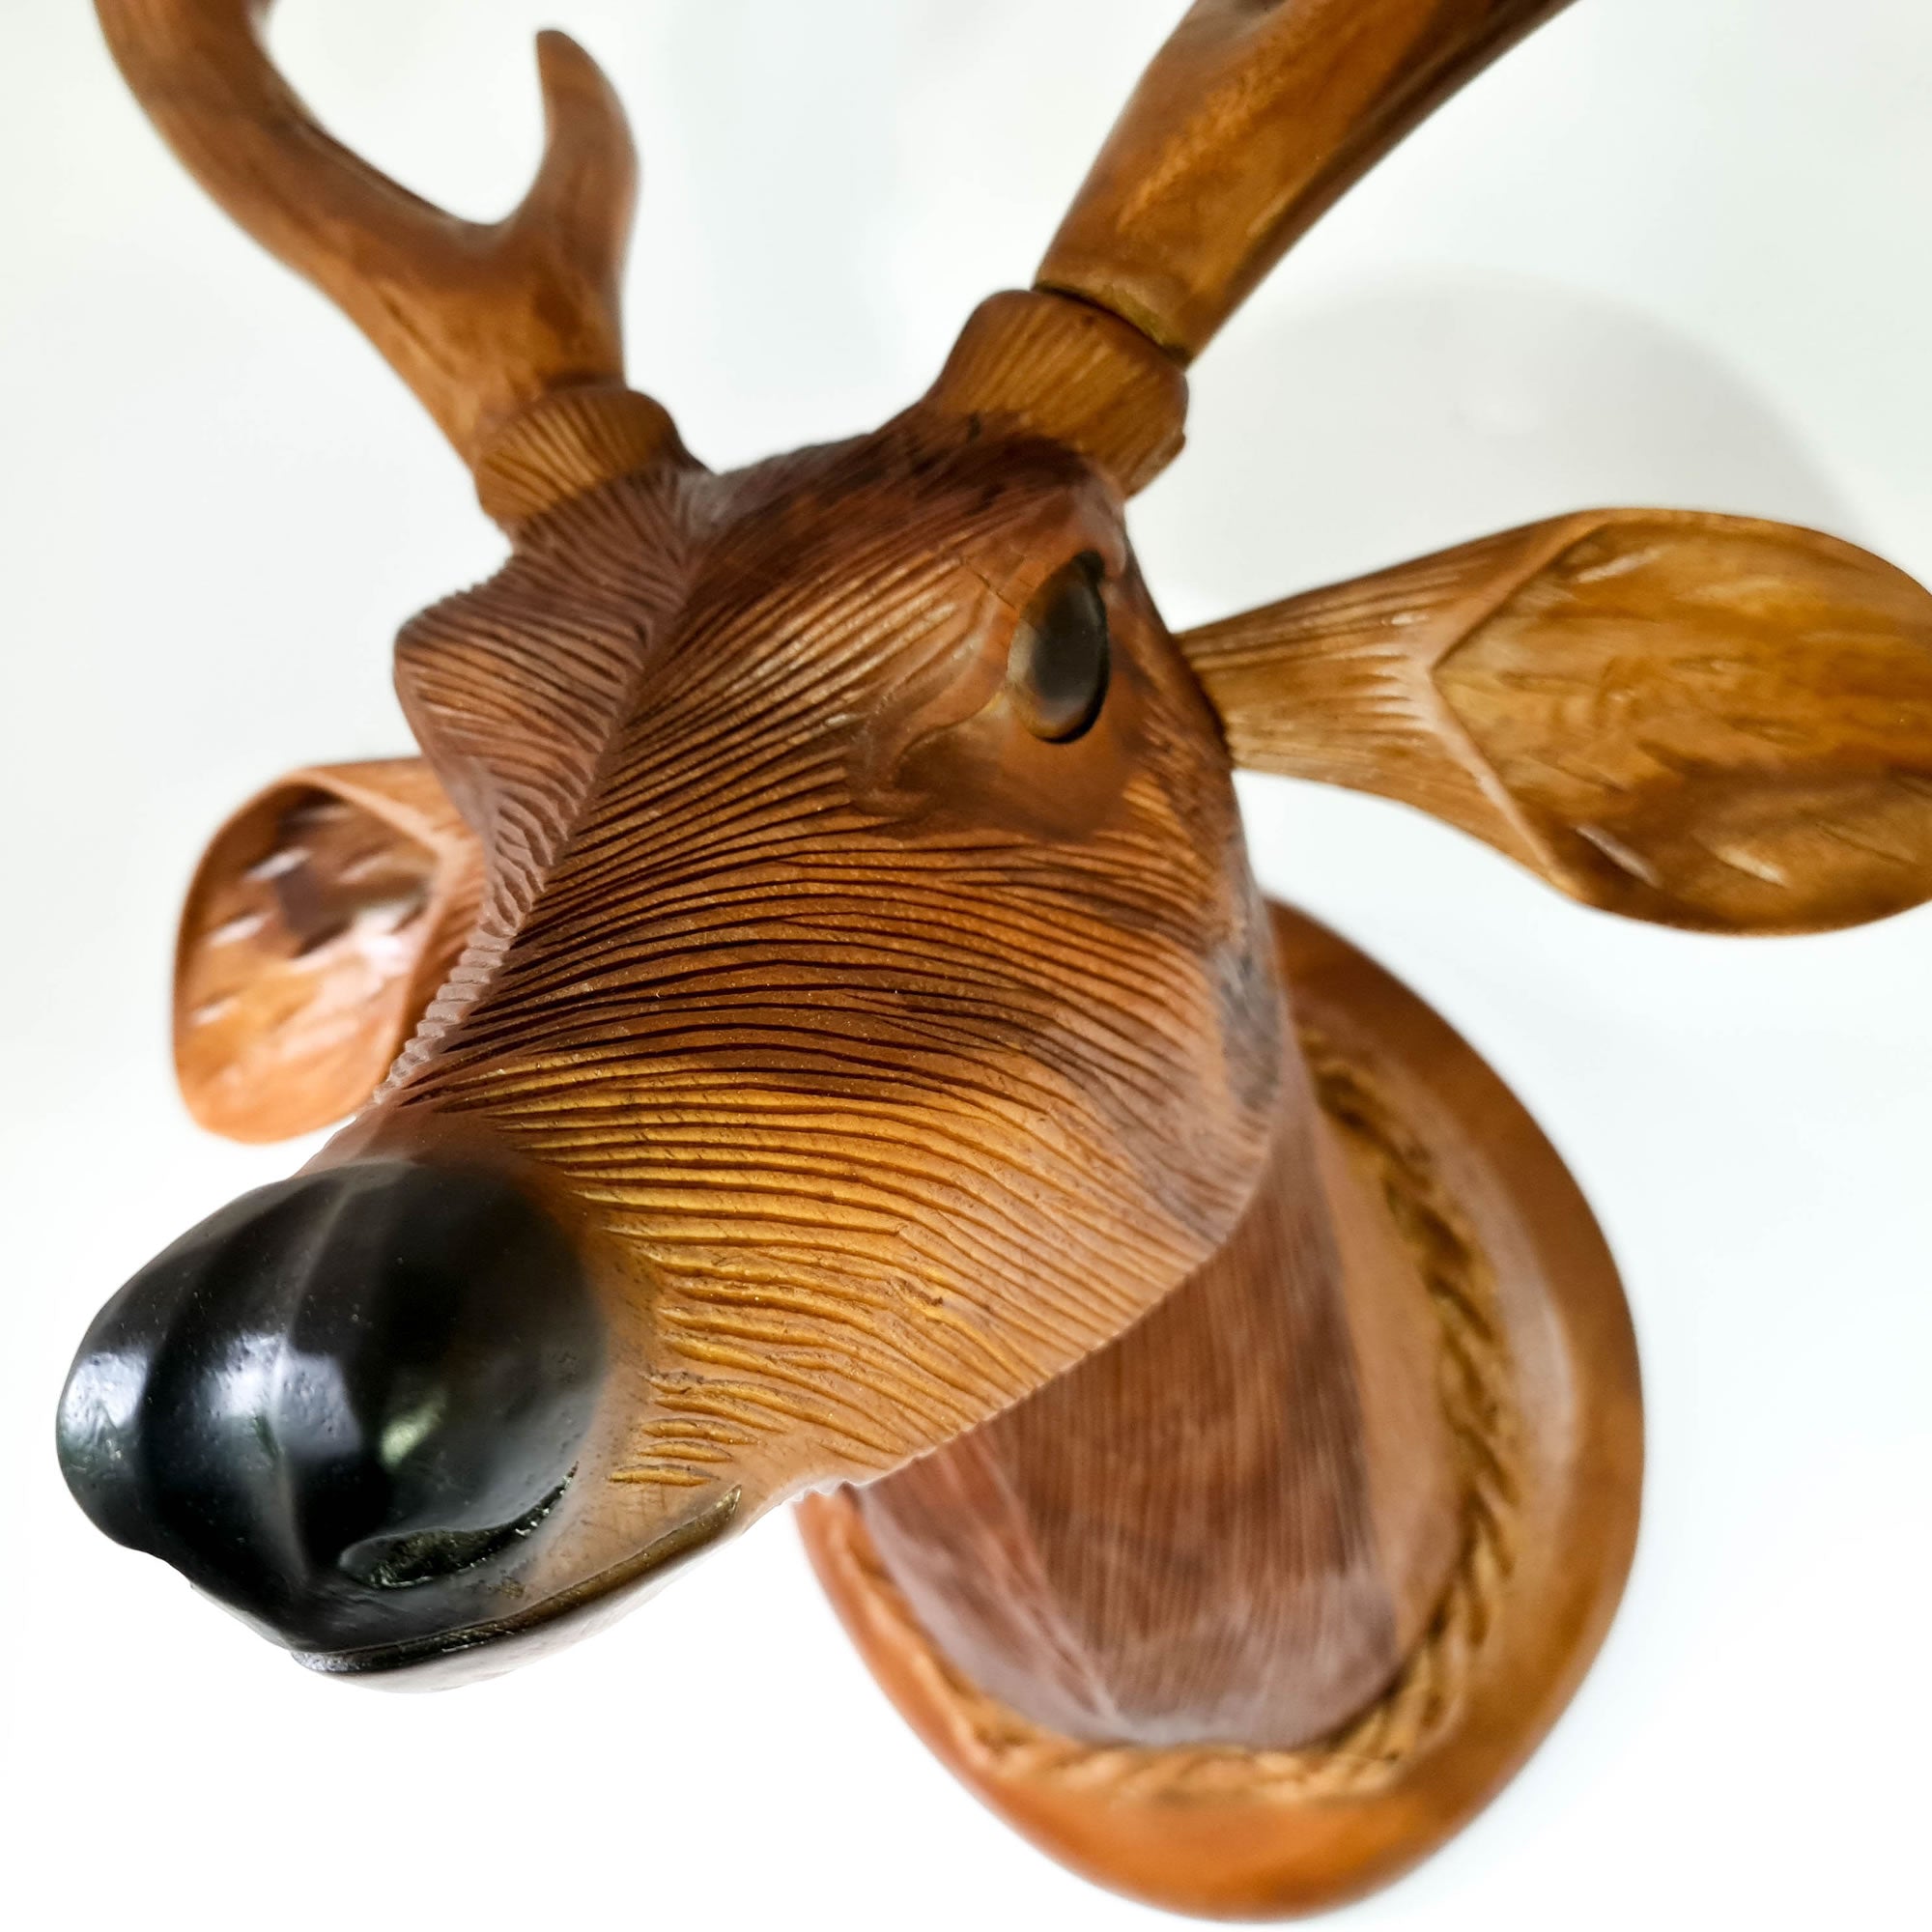 Deer Buck Head - Carved Wooden Decorative Sculpture ArtDeer Buck Head - Carved Wooden Decorative Sculpture ArtHand-carved room decoration wooden wall art sculpture | Unique Buck Deer Stag Head rare antique style hangings and gifts | Bohemian boho carved headboards